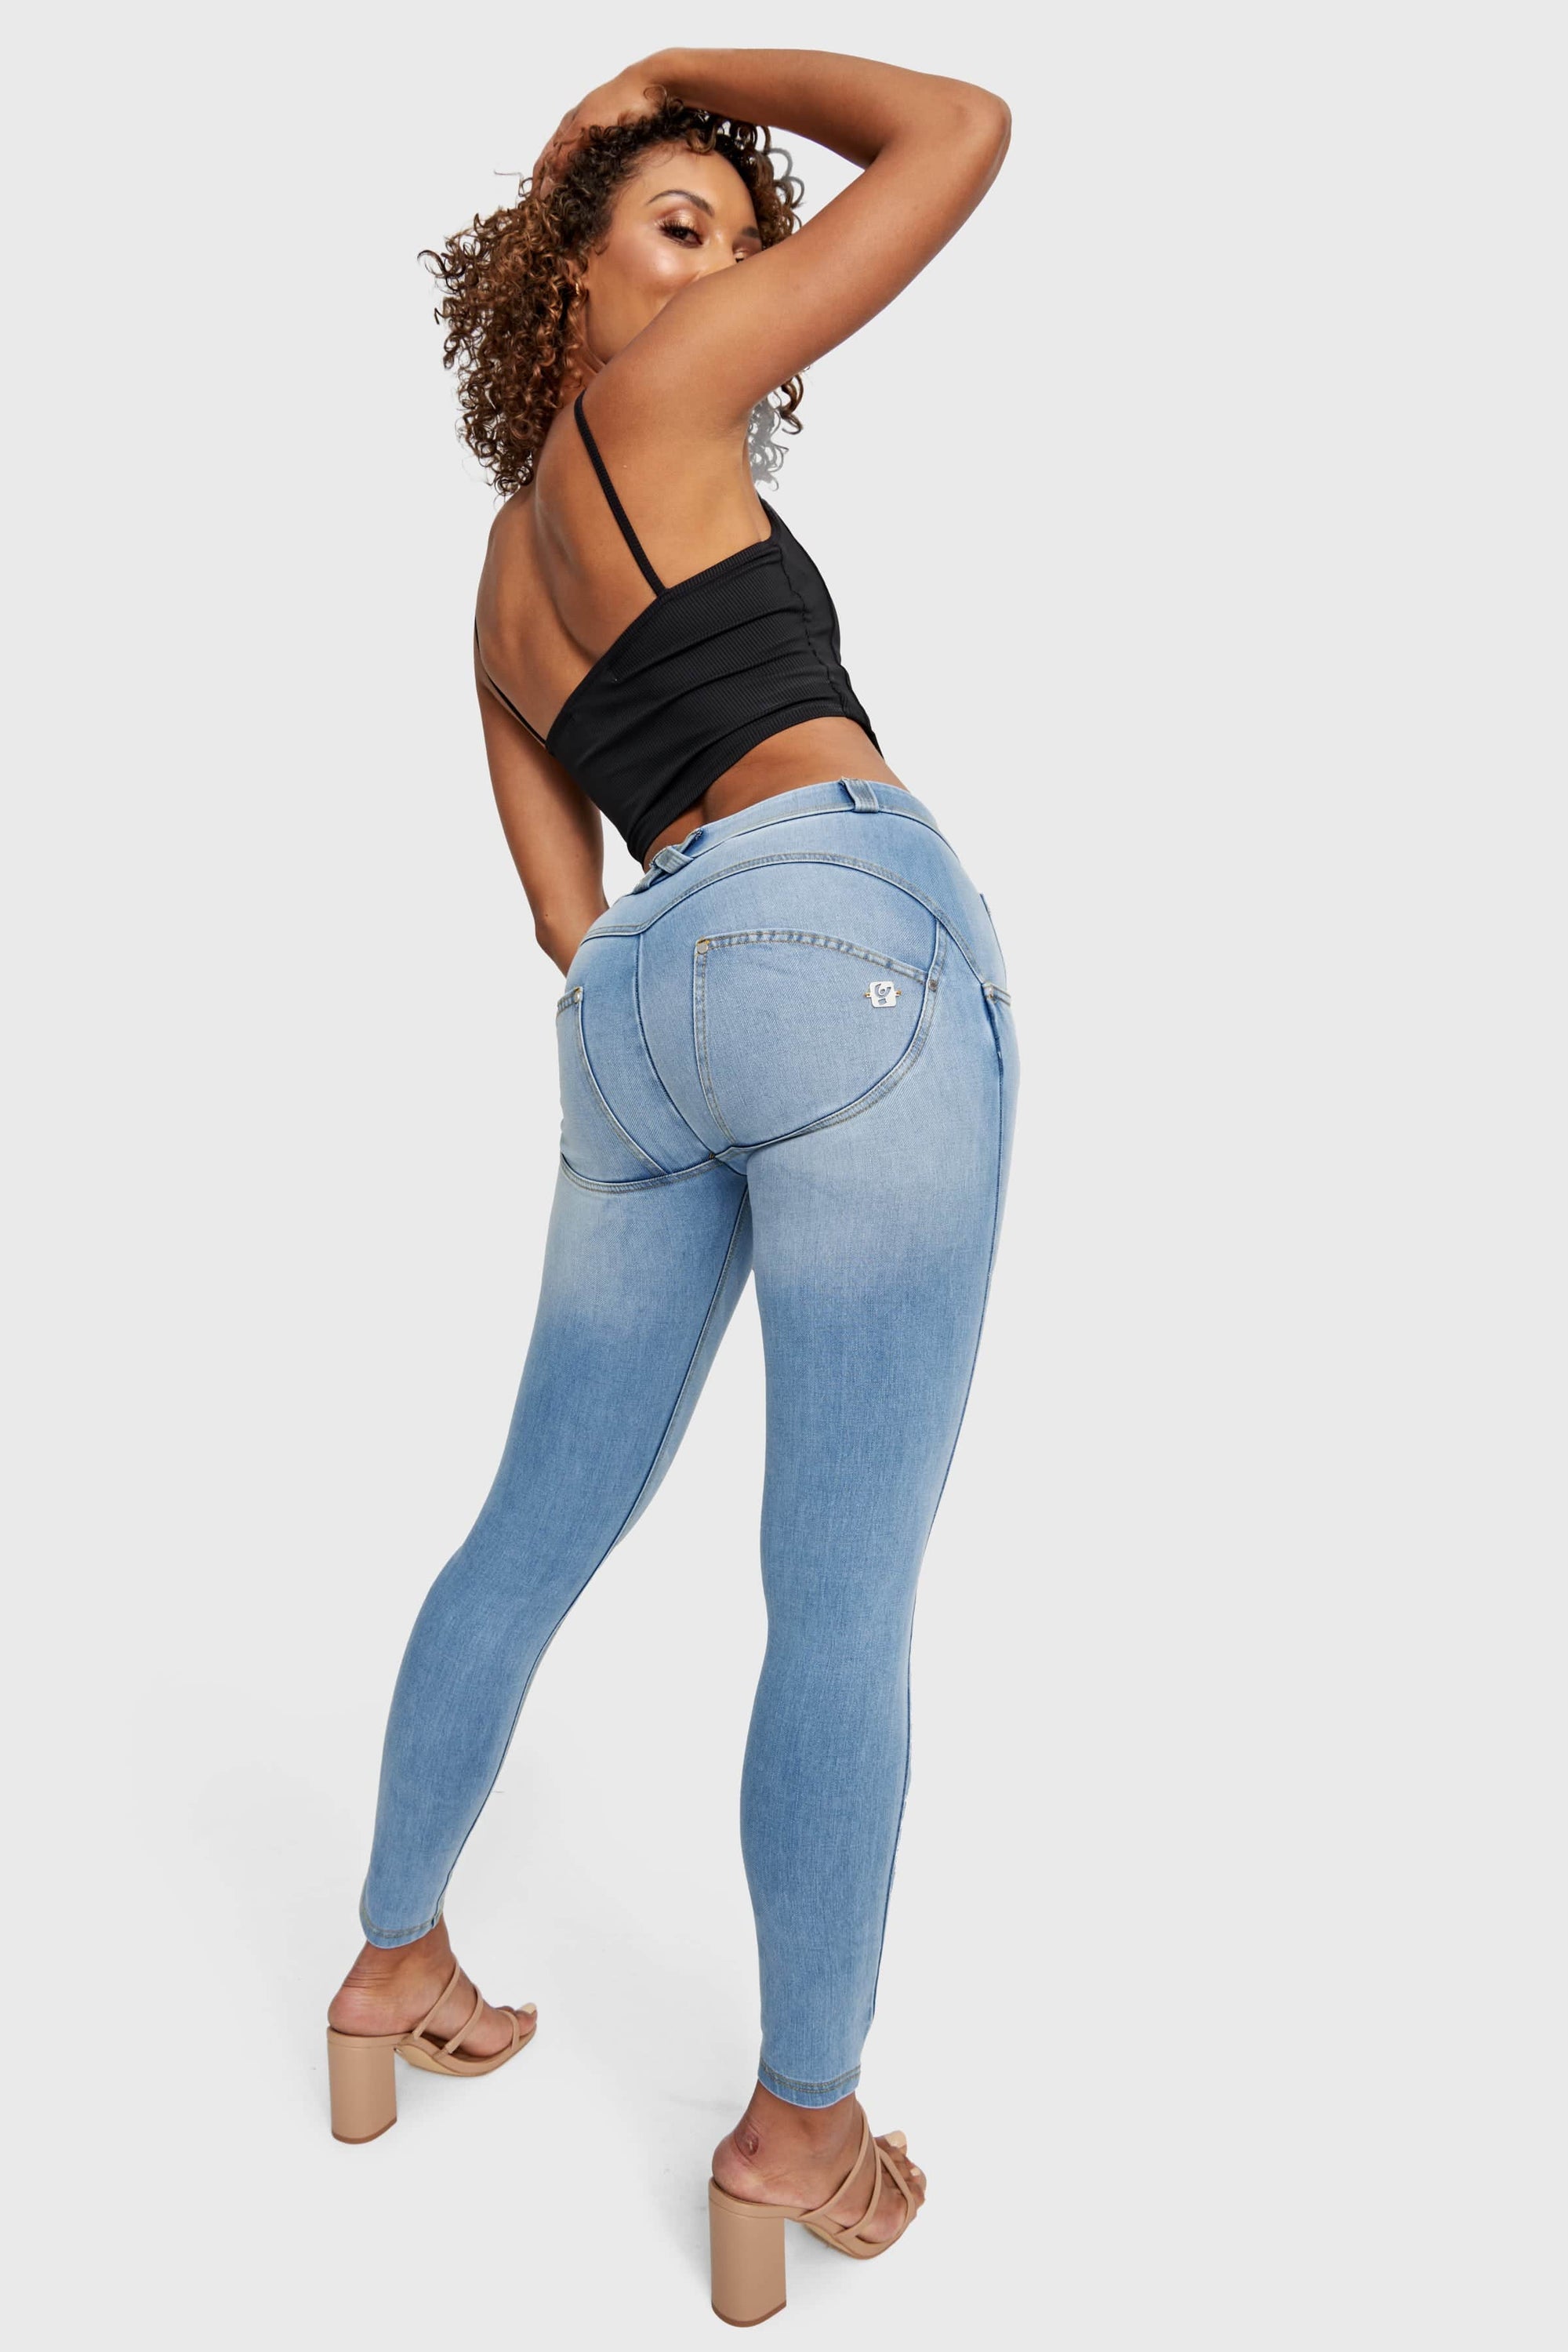 WR.UP® Snug Jeans - Mid Rise - Full Length - Light Blue + Yellow Stitching 3